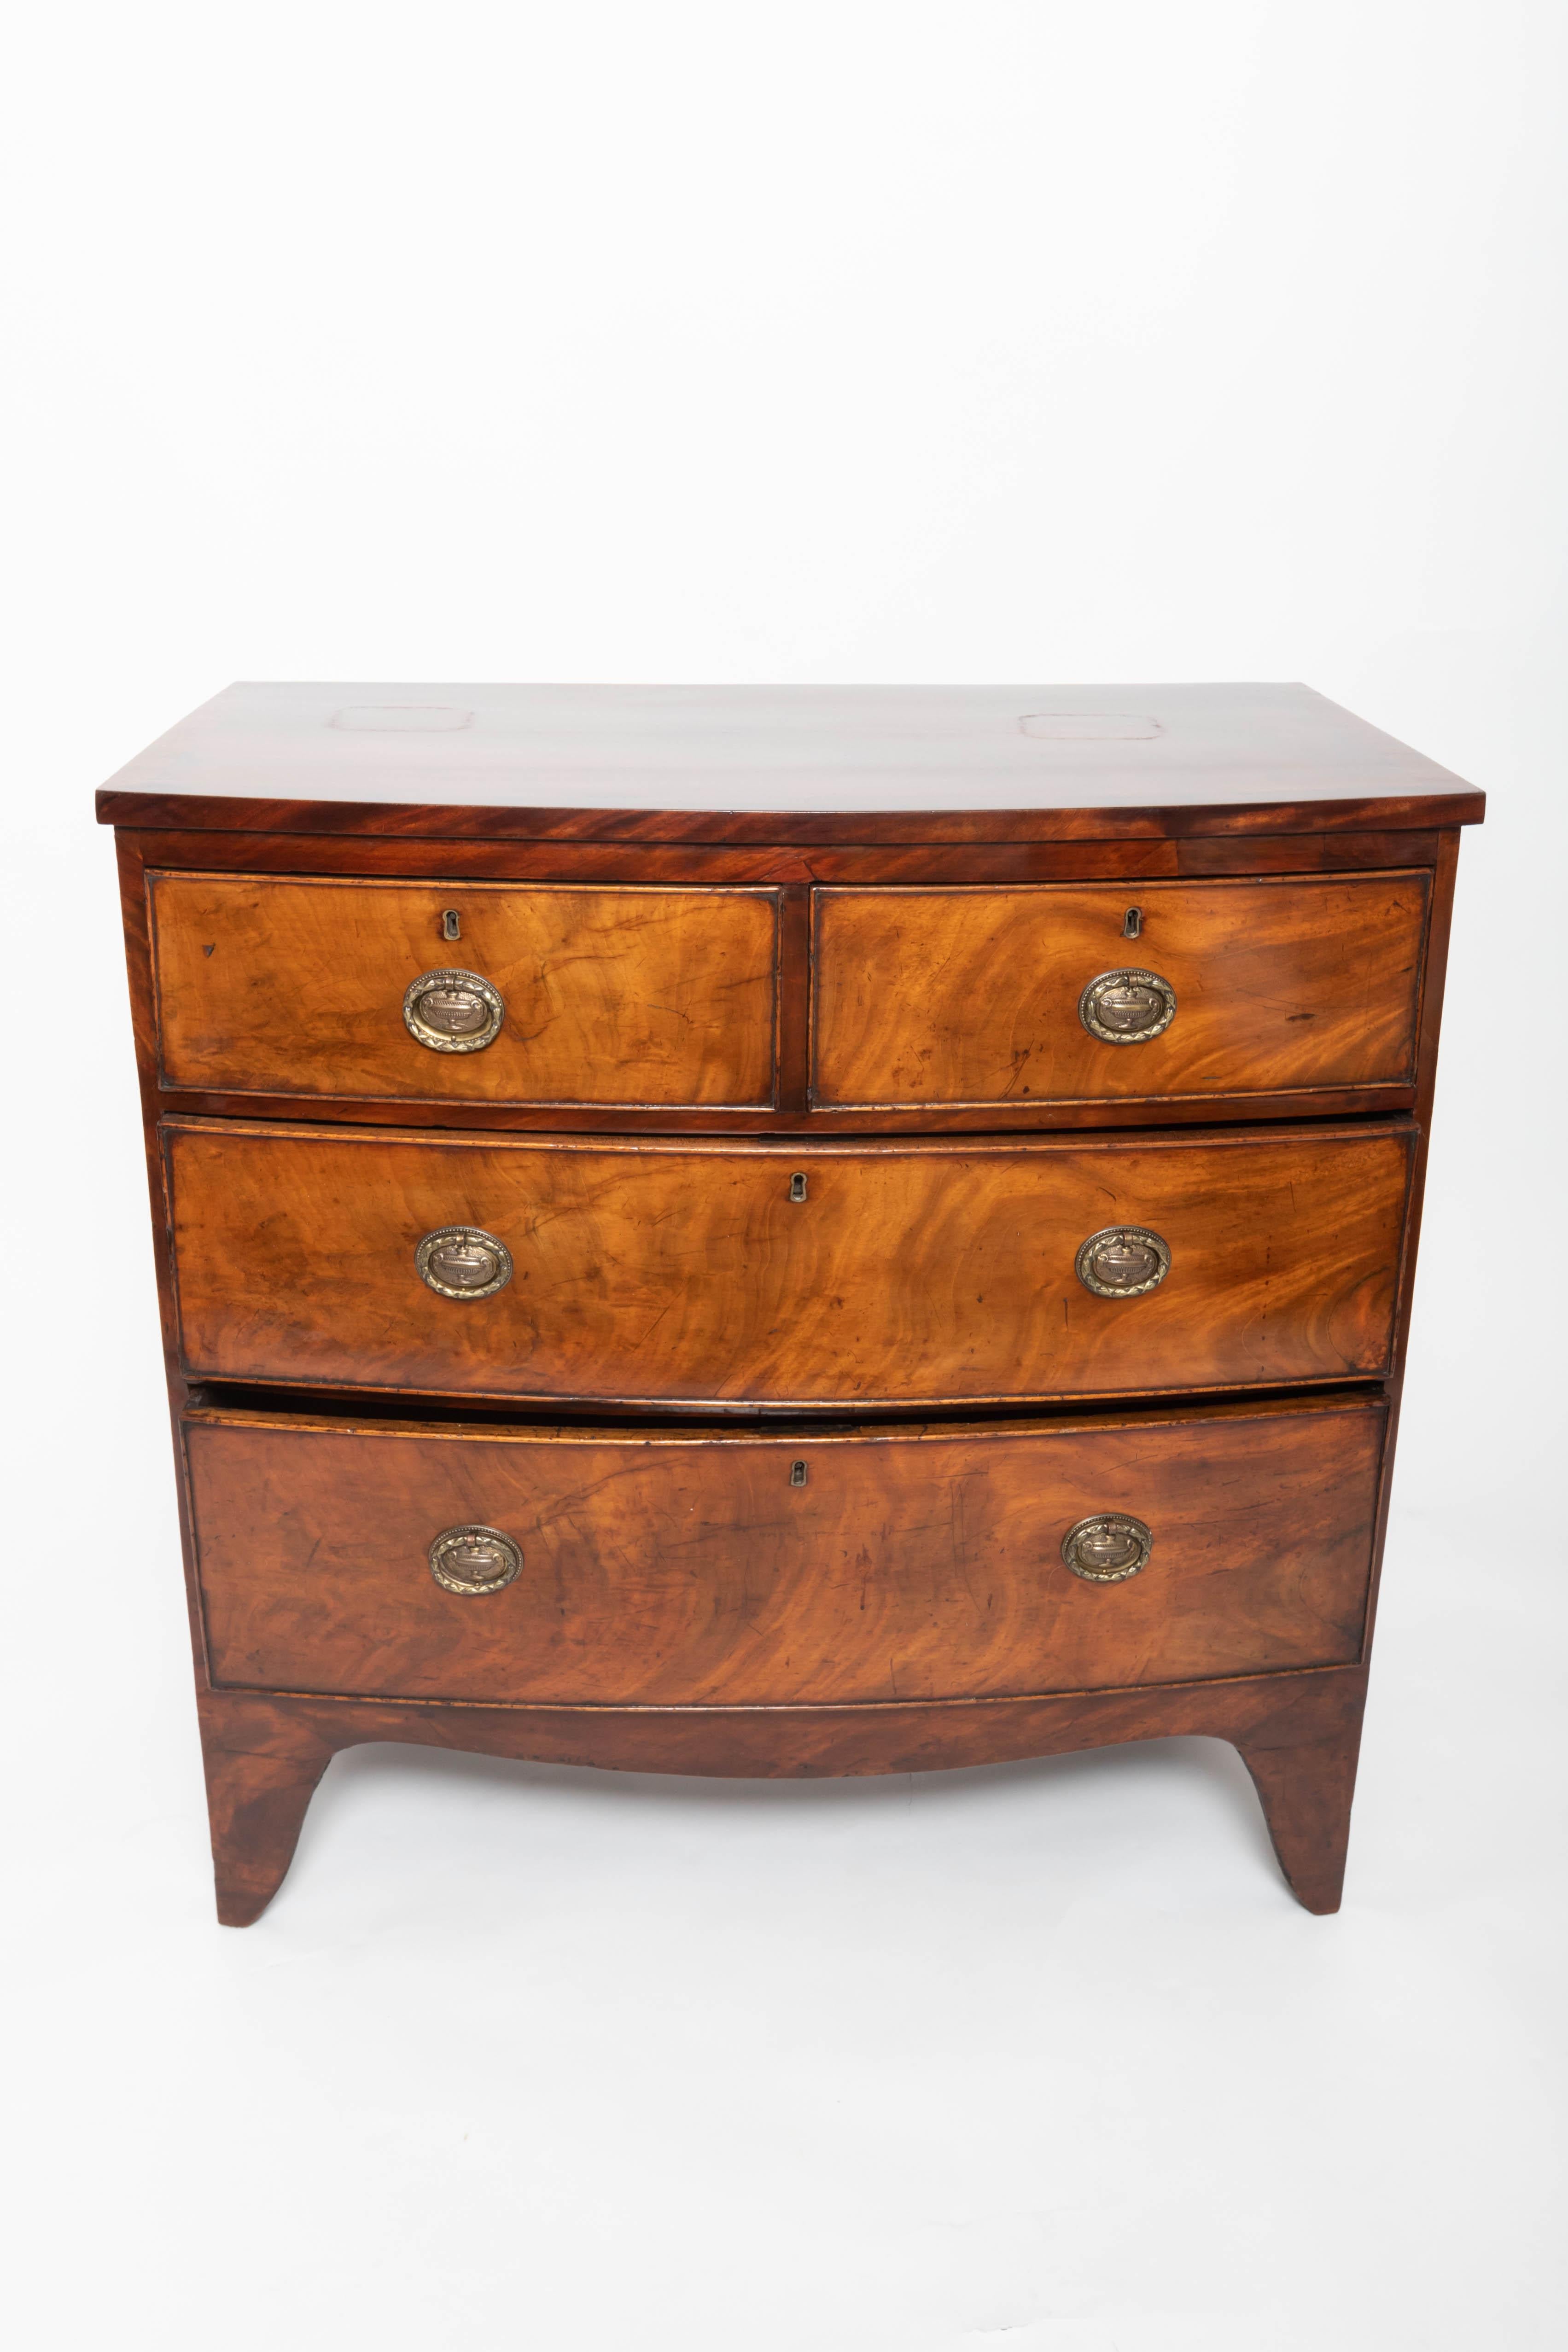 Georgian chest of drawers, two short drawers over three long shaped apron, brass pulls, banded edge on top, splayed feet, wonderful graining.